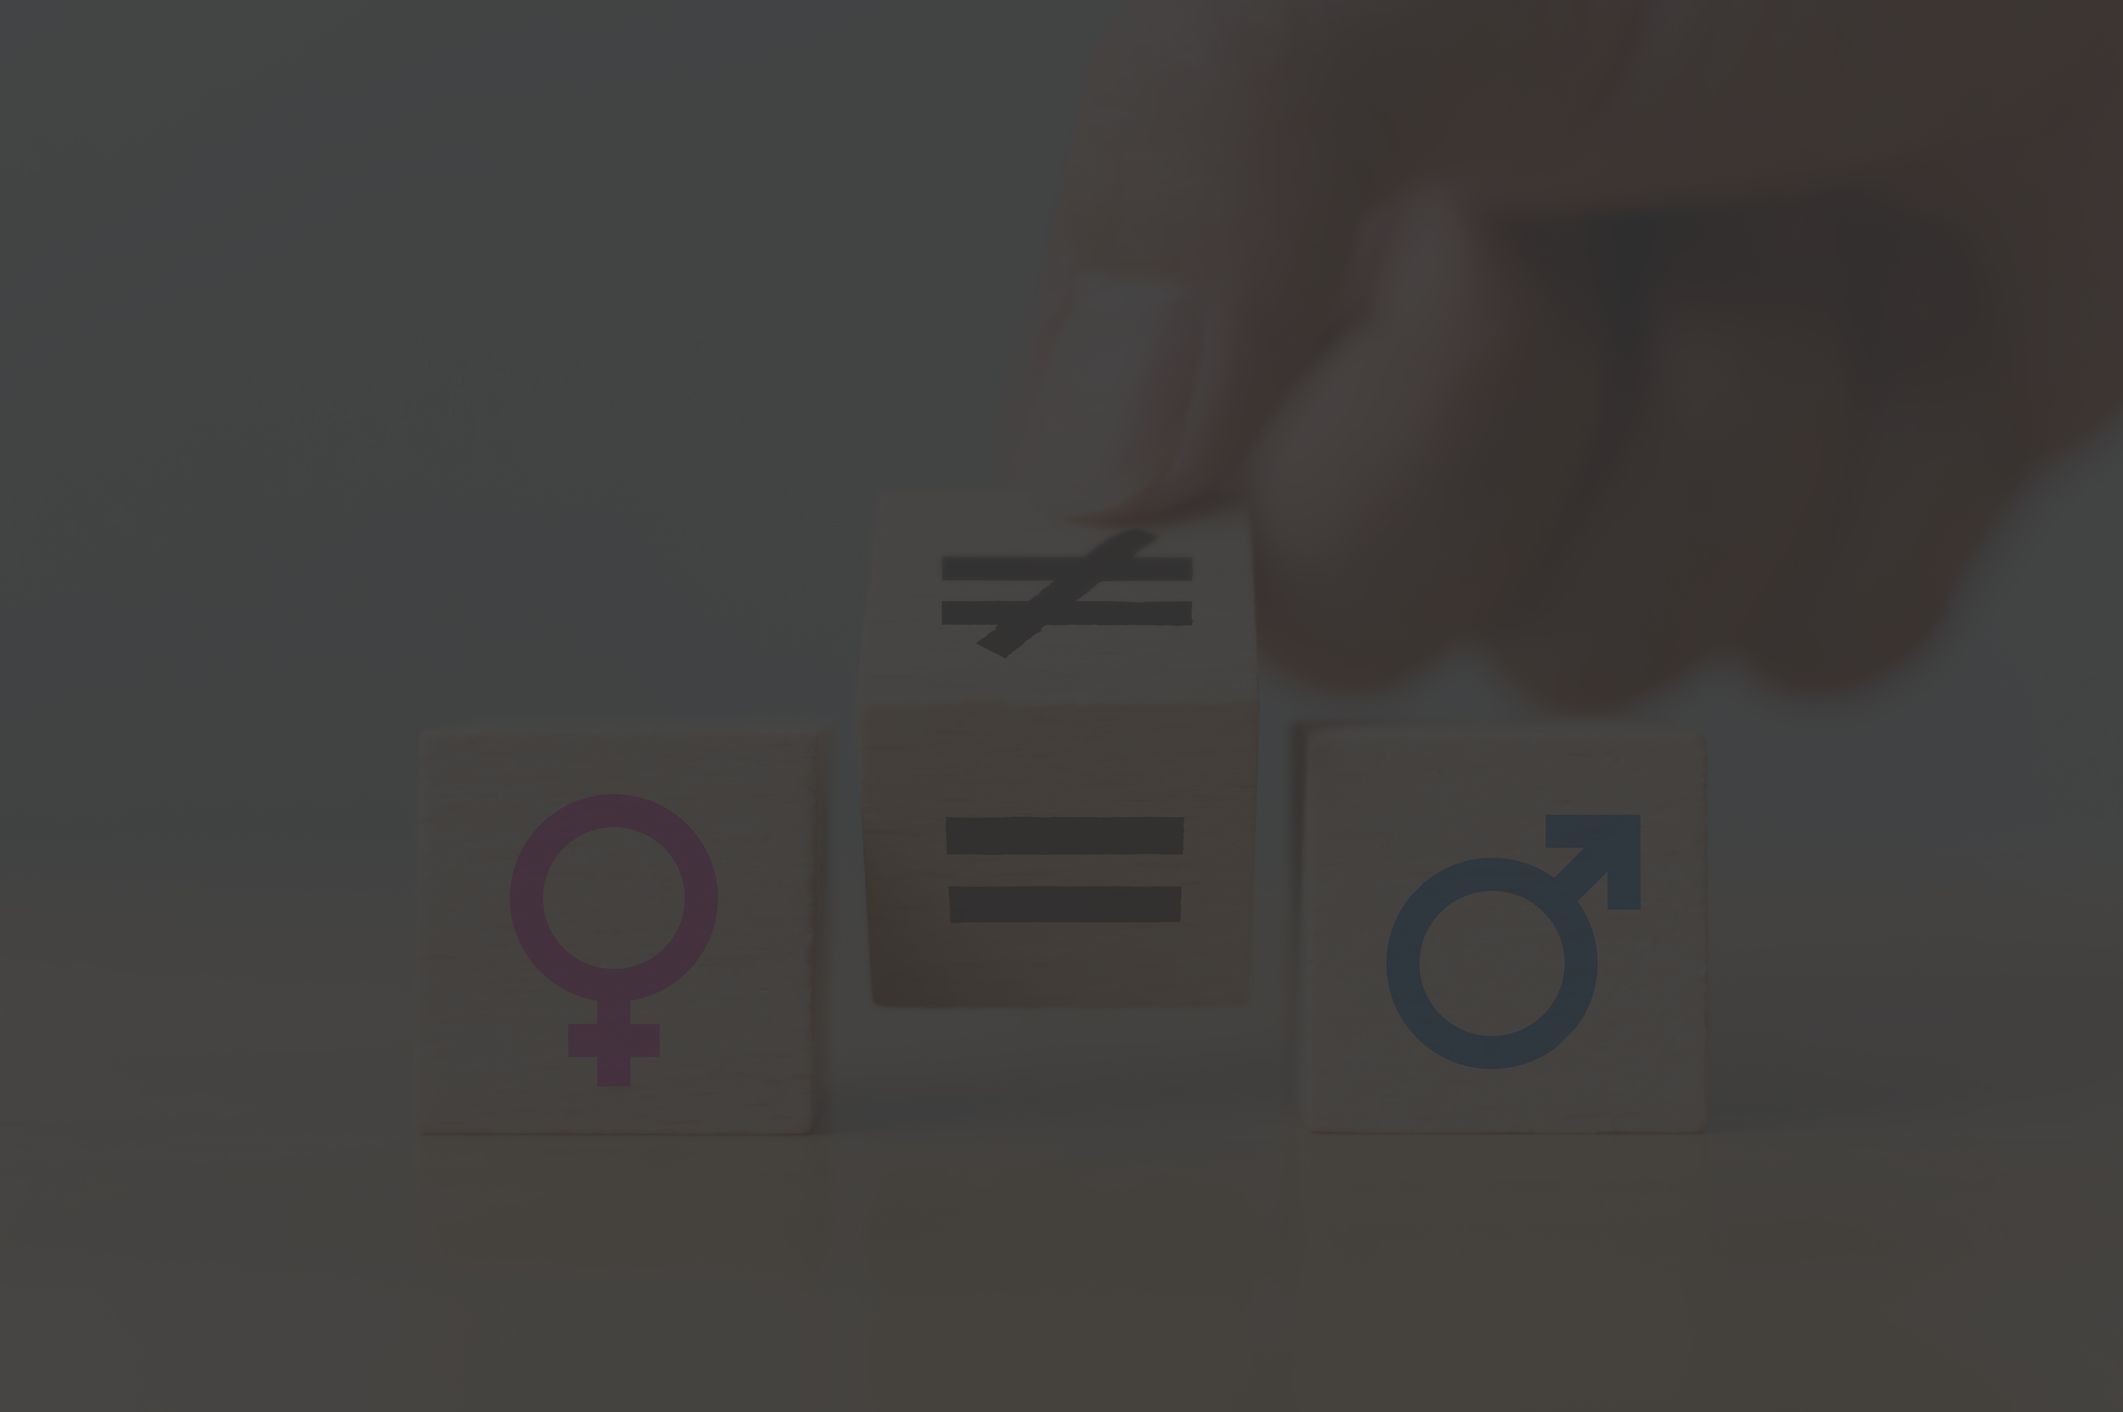 an image of three wooden blocks; on the left, the female sign, in the middle a block with both equal and unequal symbols, and on the right the male sign